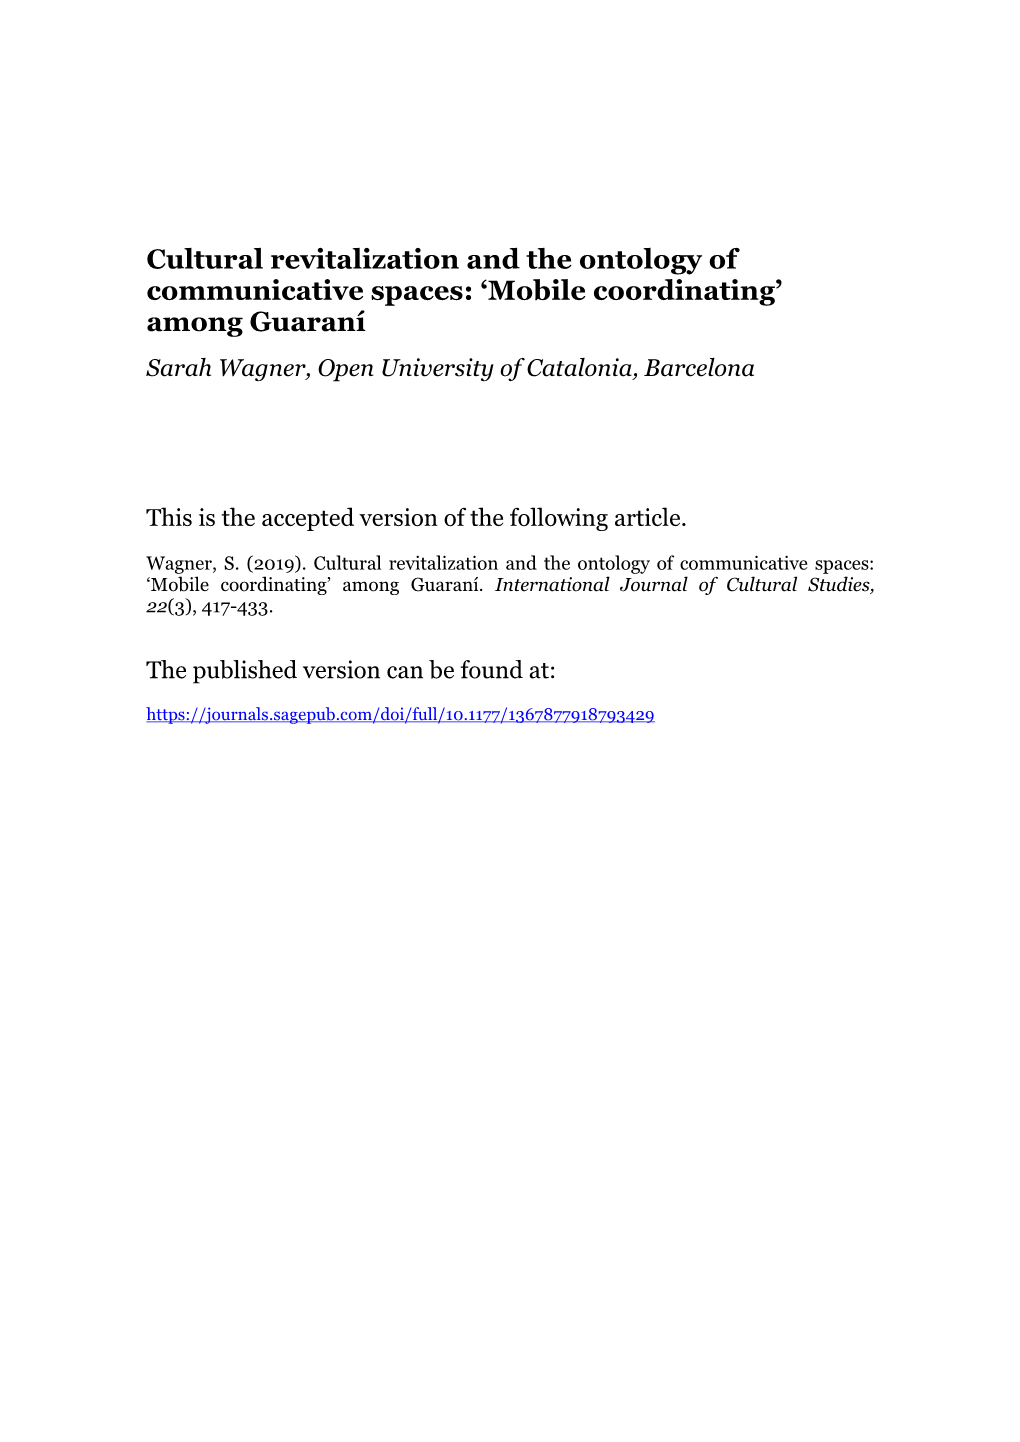 Cultural Revitalization and the Ontology of Communicative Spaces: ‘Mobile Coordinating’ Among Guaraní Sarah Wagner, Open University of Catalonia, Barcelona